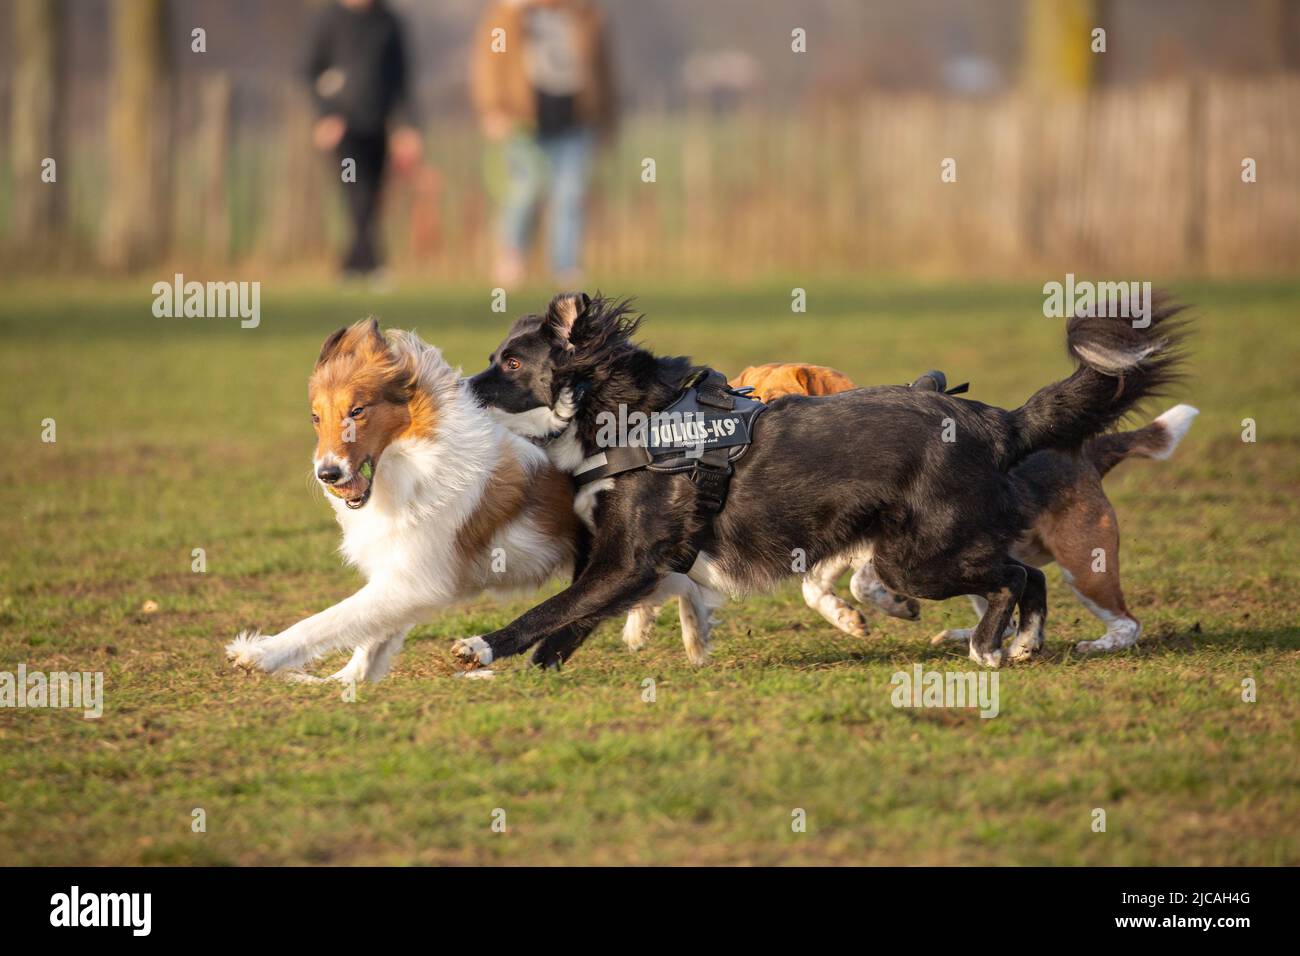 Sheltie with tennis ball in mouth and border collie wearing harness having fun and running at the dog park with people and fence out of focus in the b Stock Photo